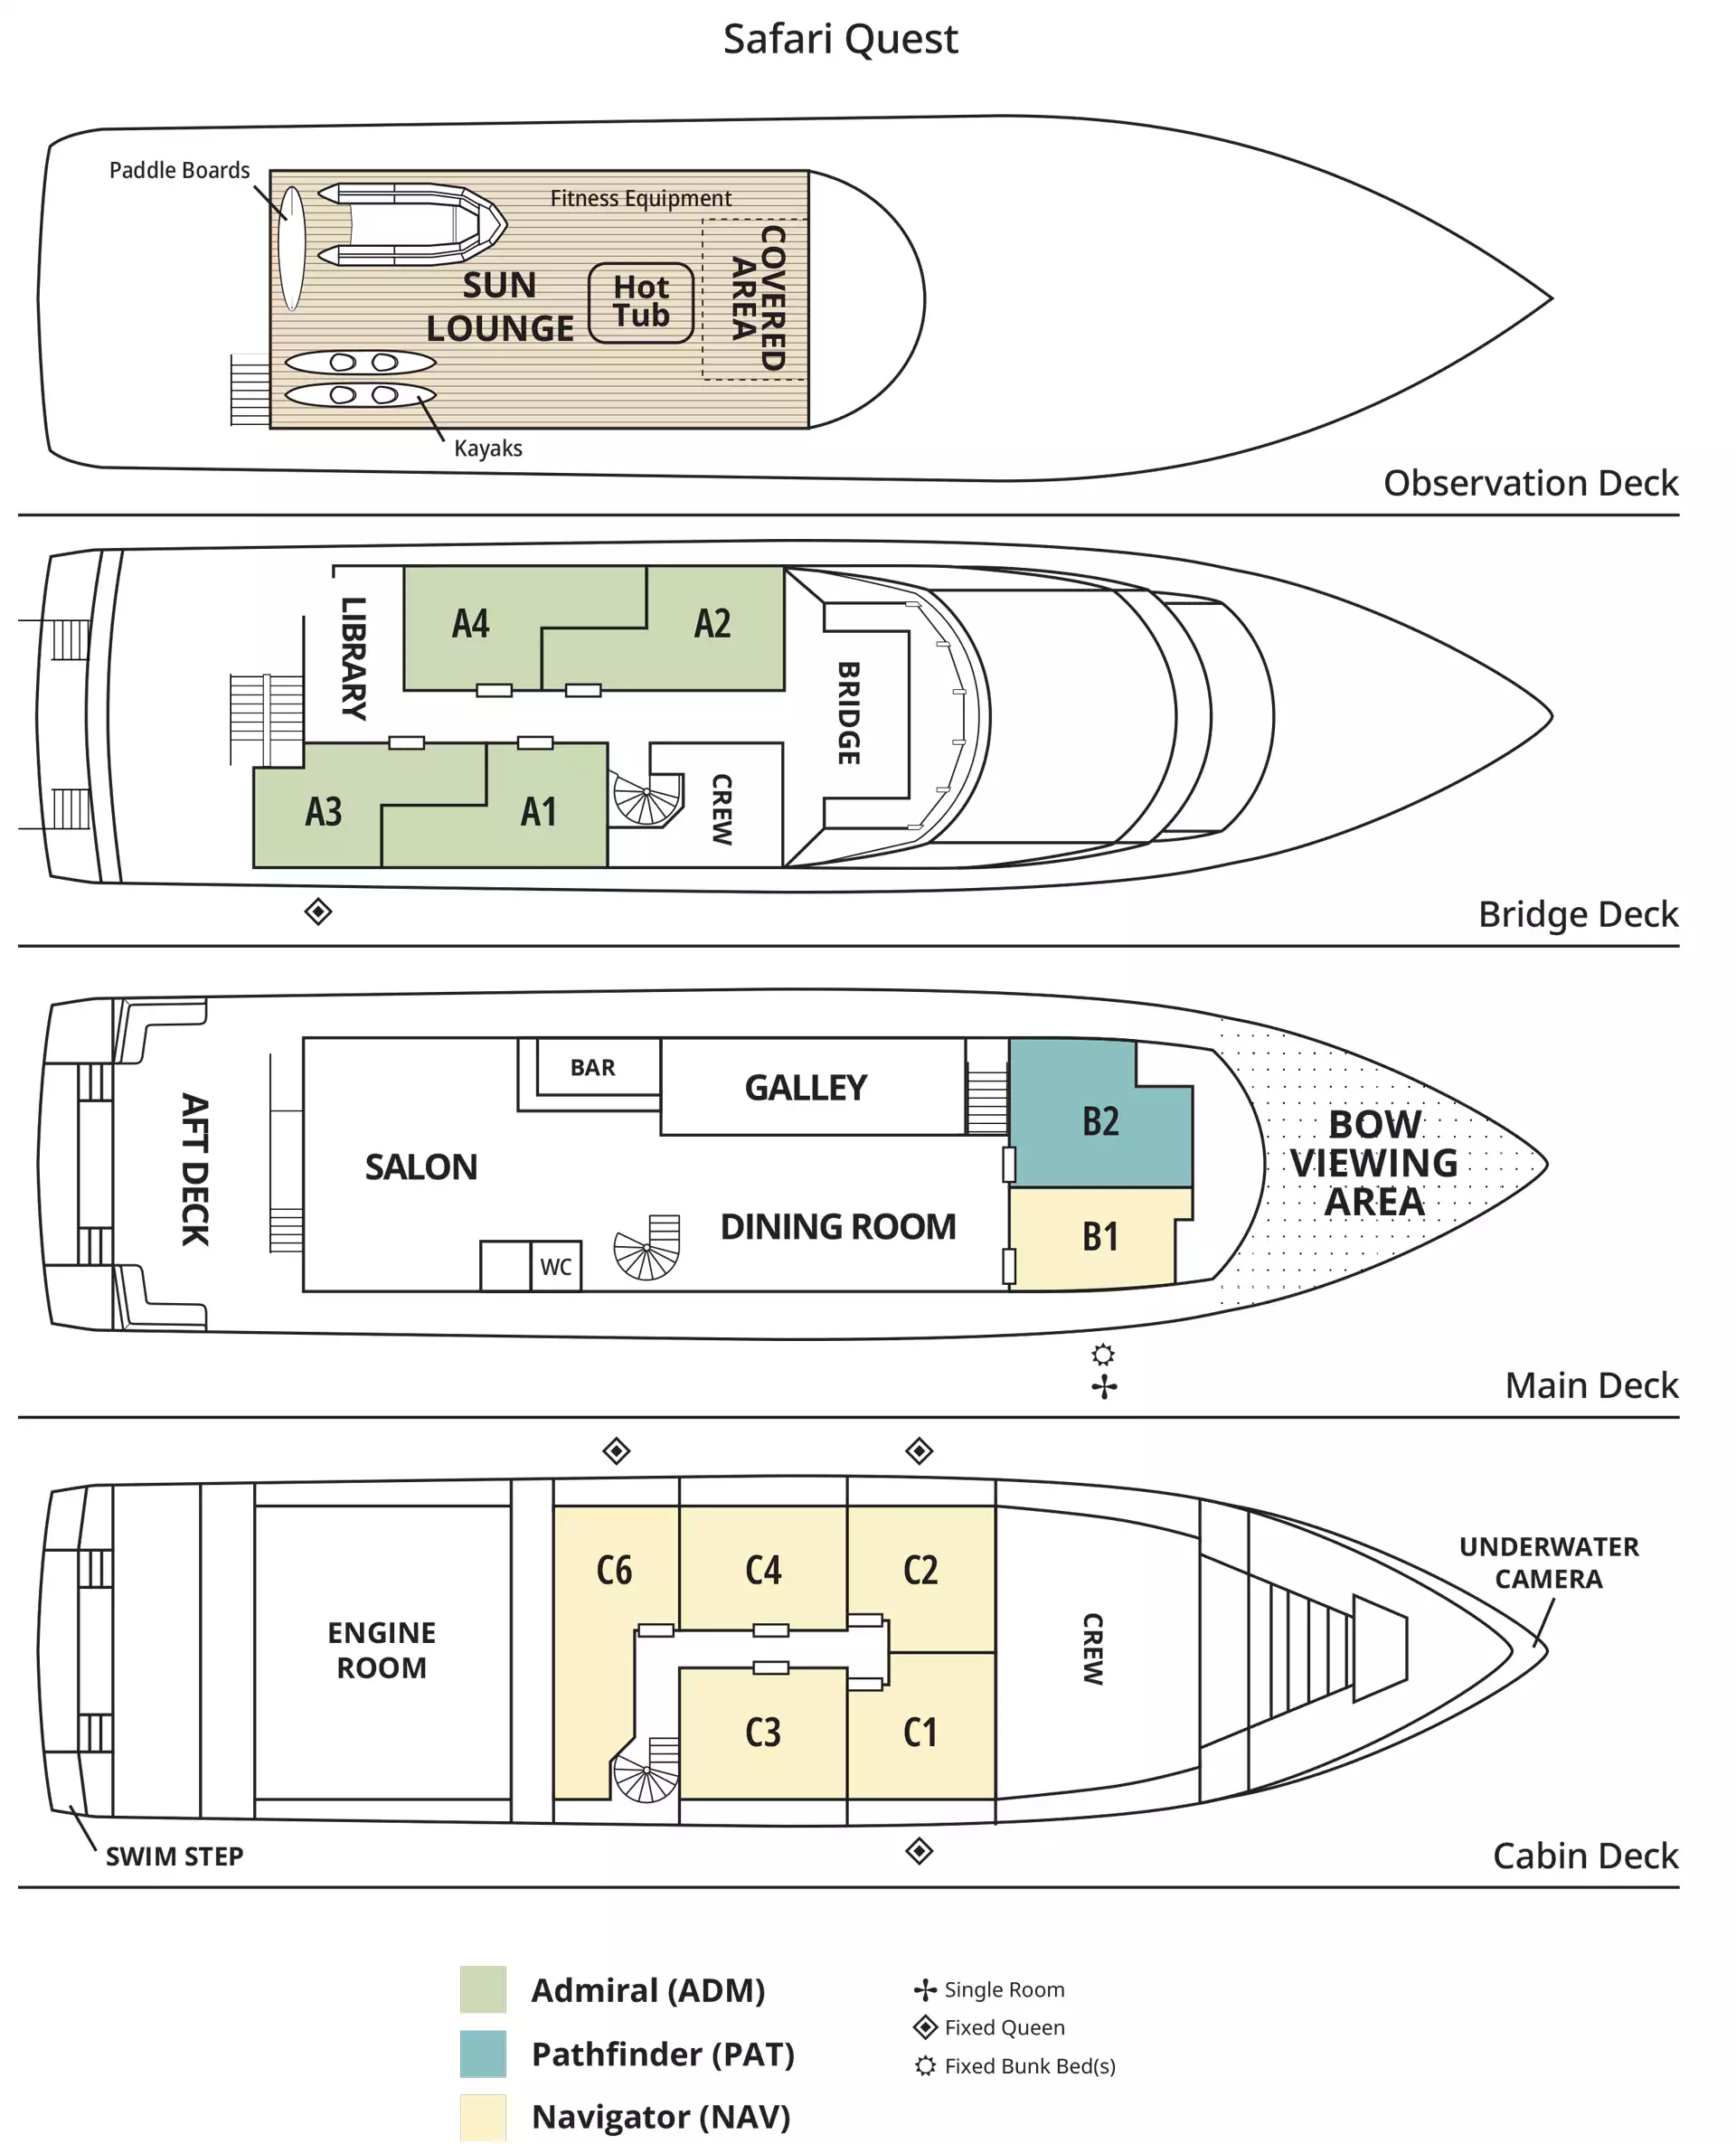 safari quest Alaska small ship deck plan with 4 guest decks, 3 cabin categories divided by color & bed configuration notes.